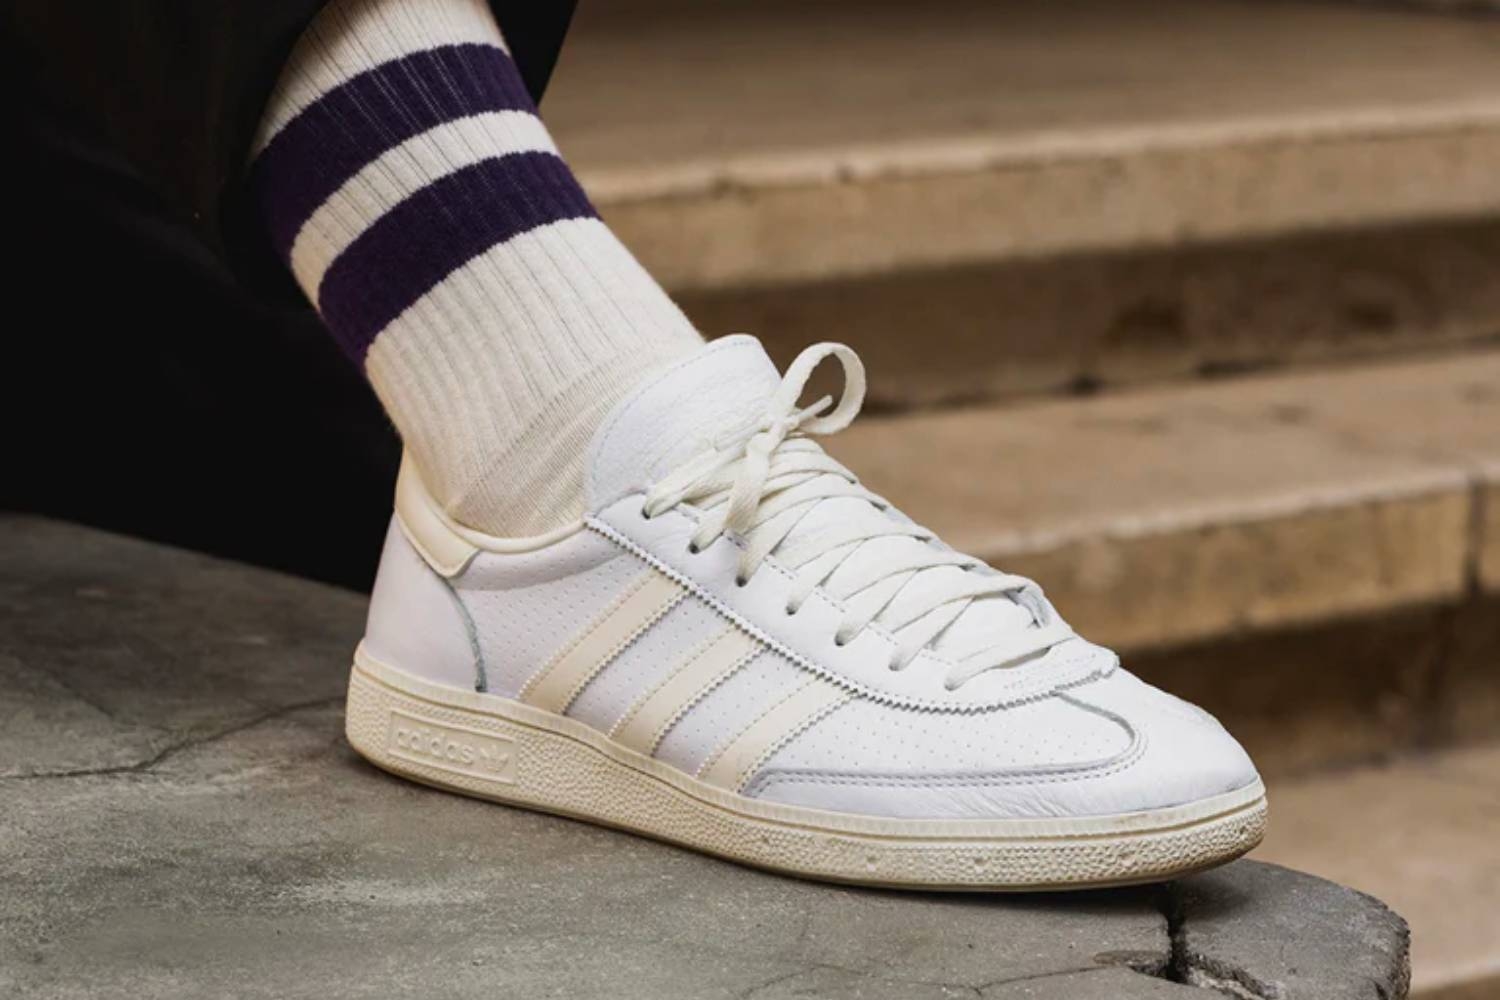 Save up to 30% on adidas Handball Spezial colorways at Footdistrict